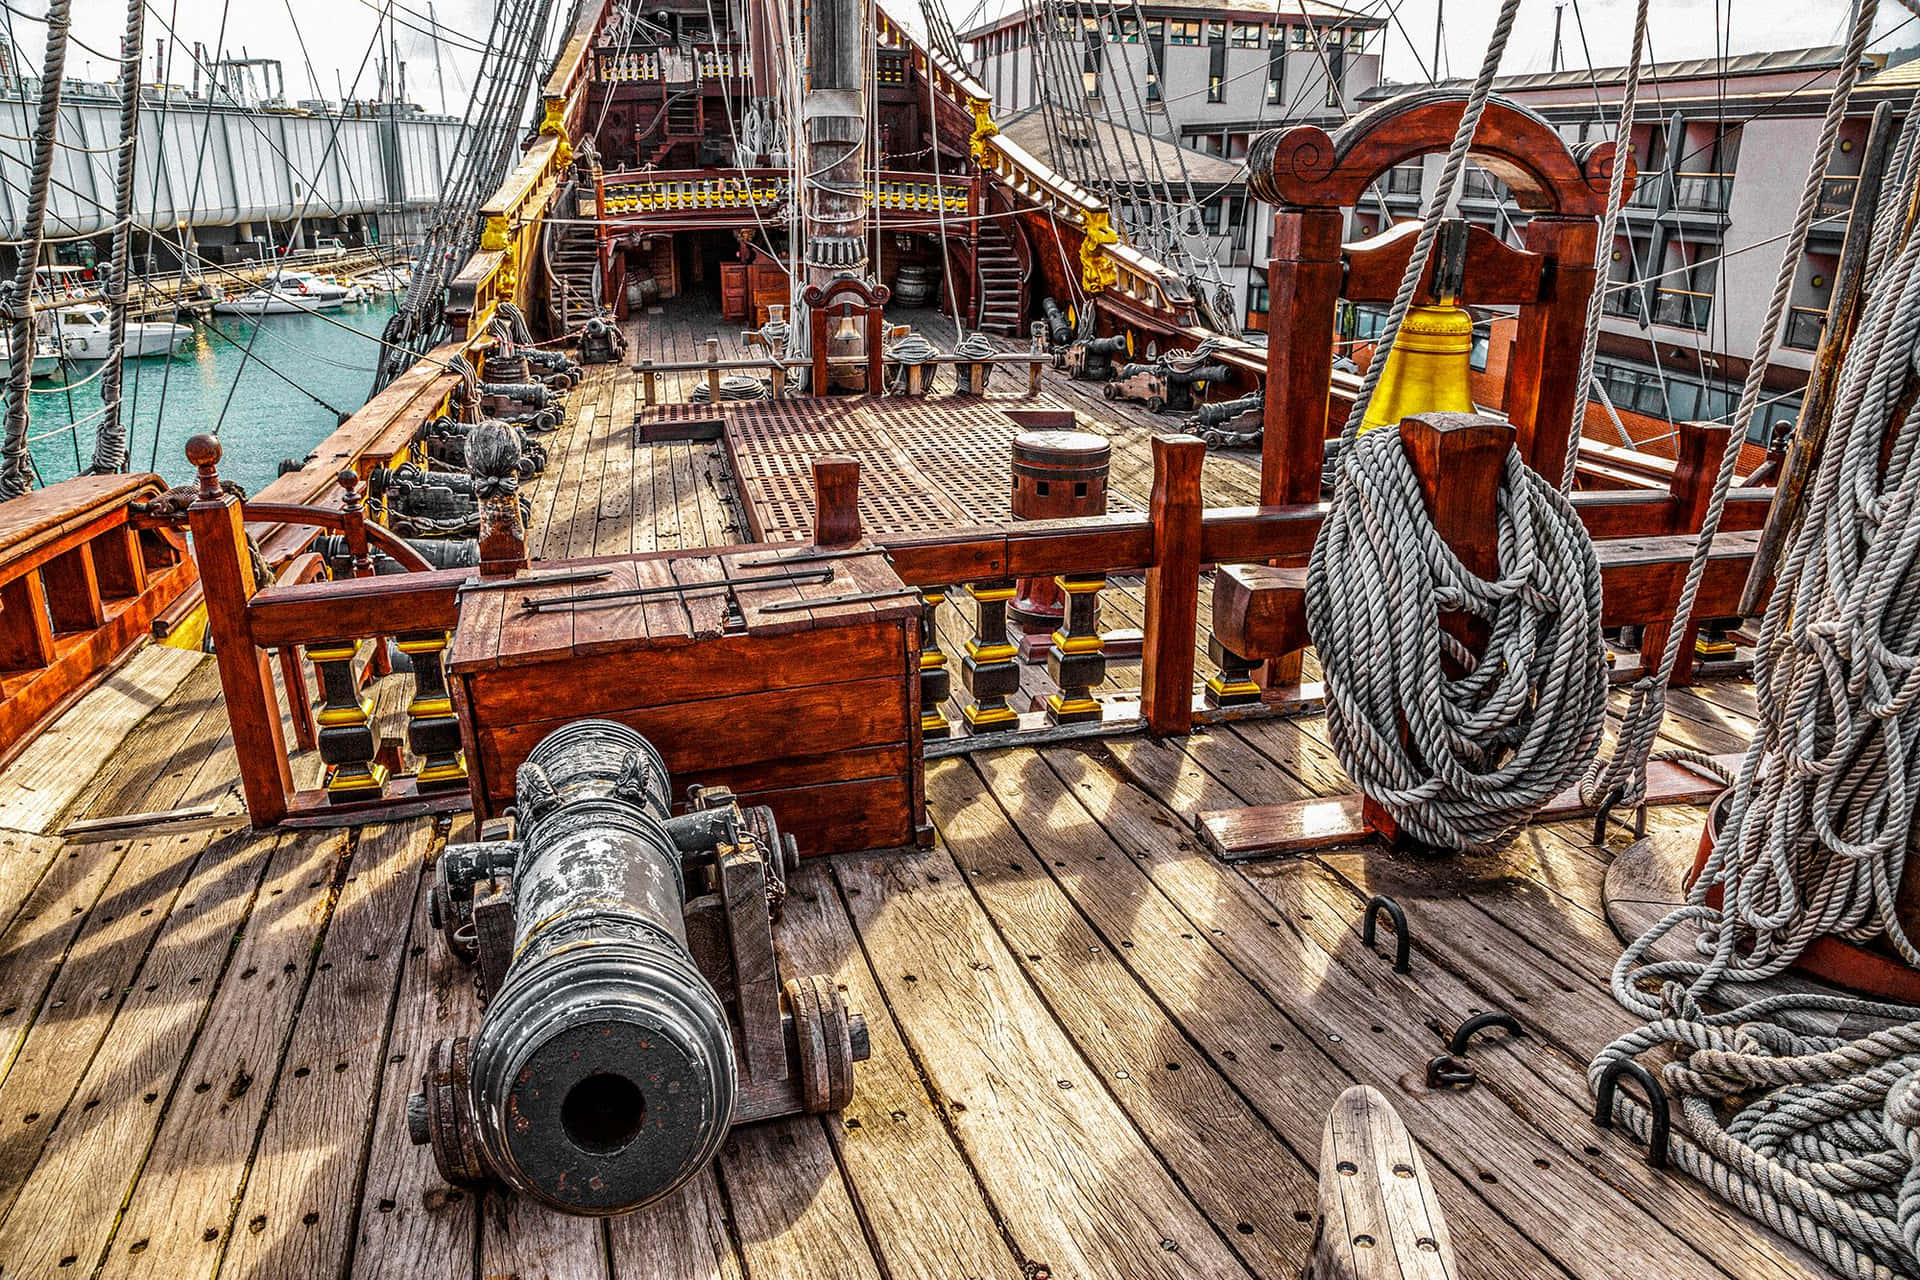 Cool Real Pirate Warship Picture